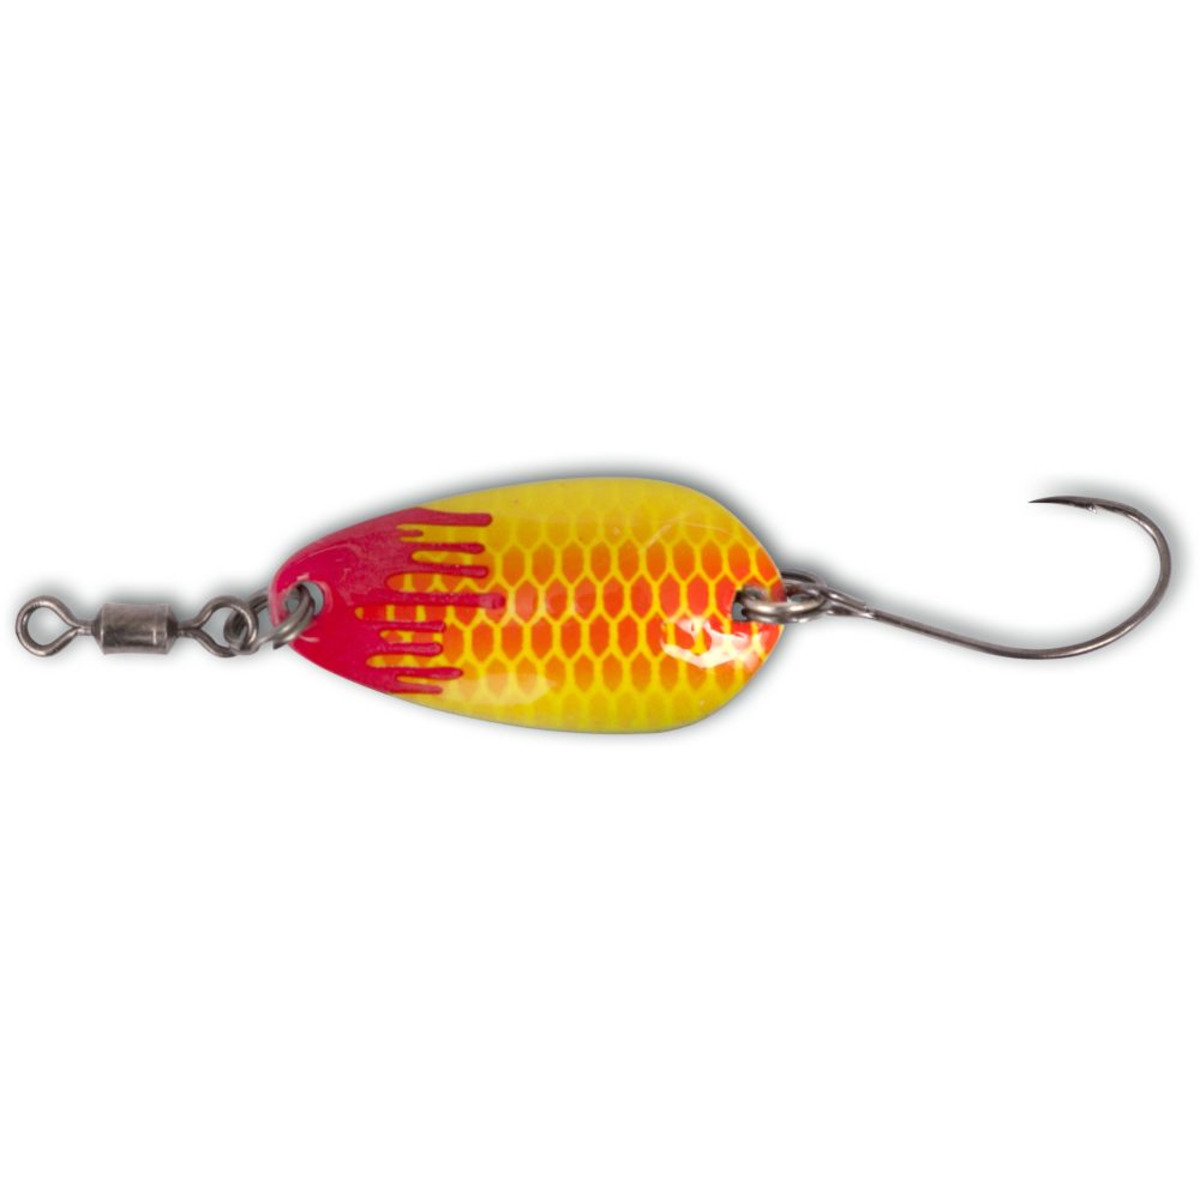 Magic Trout Bloody Loony Spoon - 2 g red/yellow